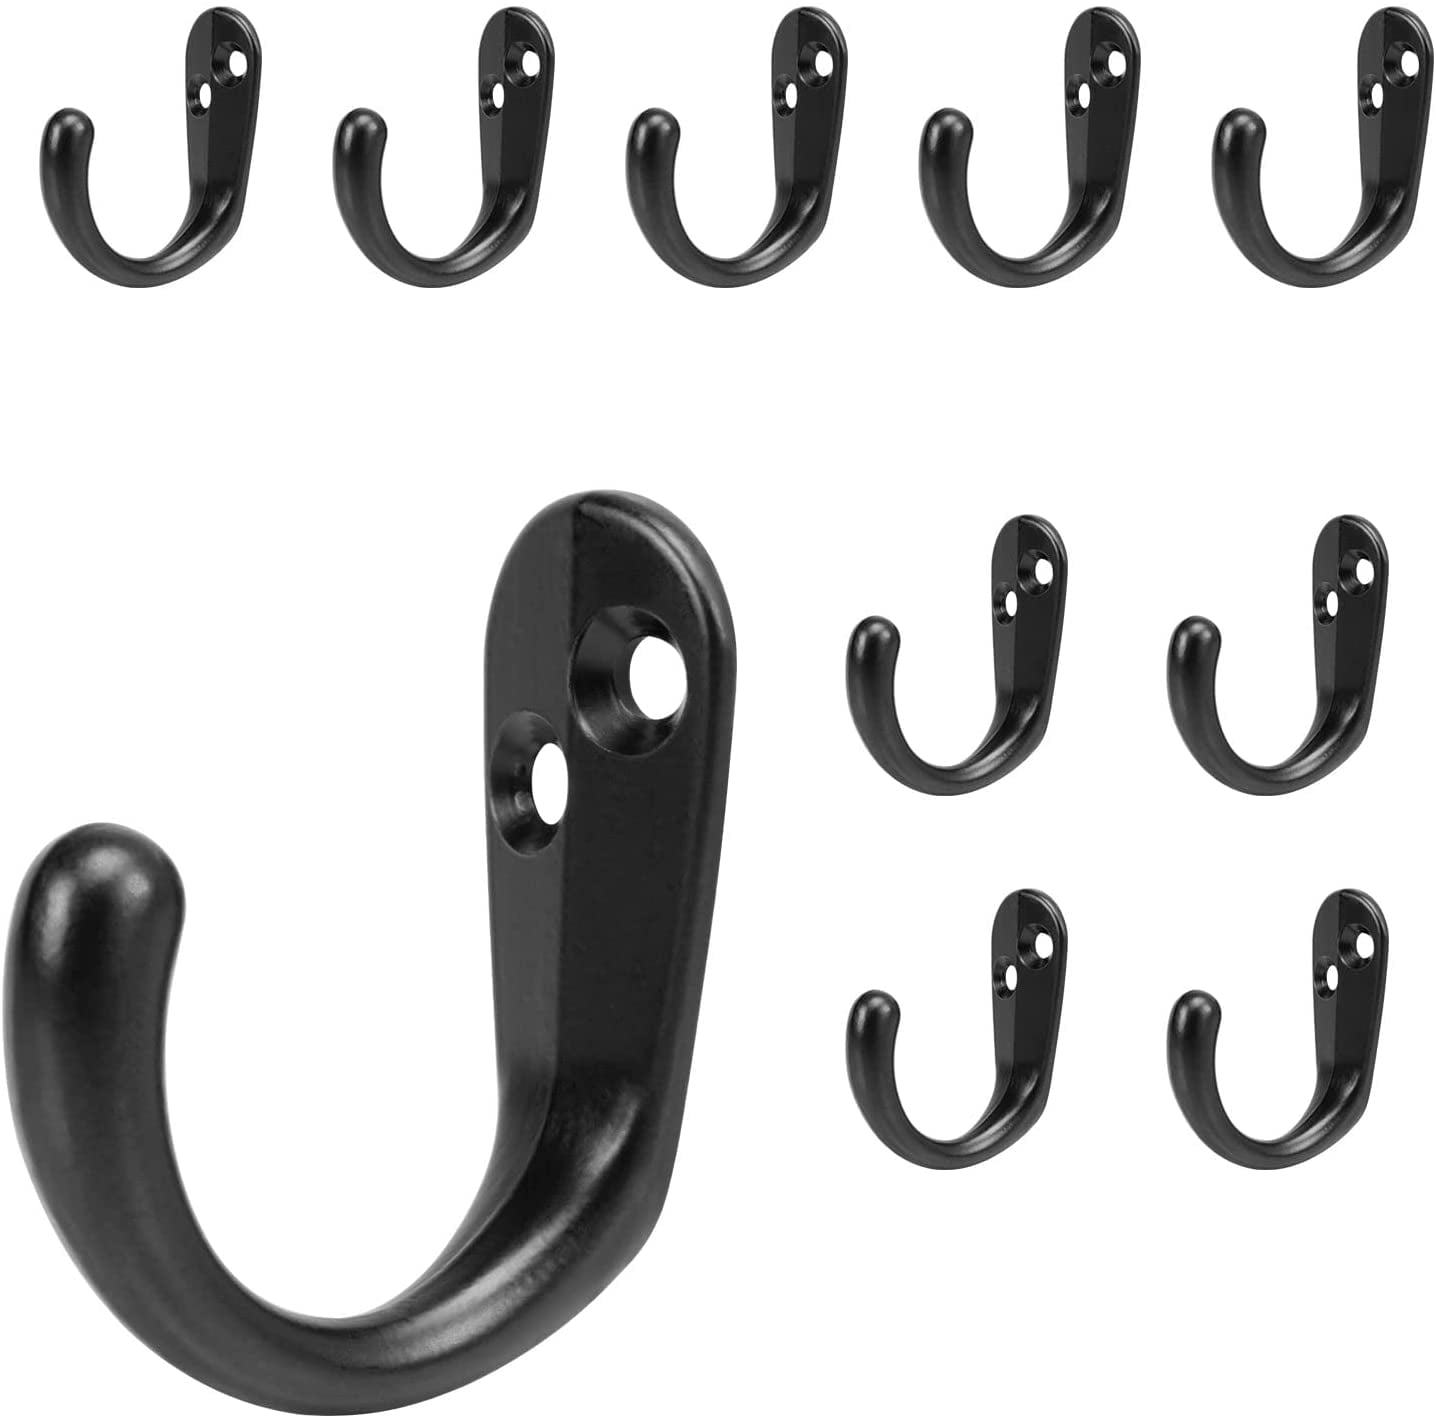 10Pcs Coat Hooks Hardware Wall Hooks Heavy Duty Hooks for Hanging Coats  Double No Rust Hooks Wall Mounted for Key, Towel, Bags, Cup, Hat 